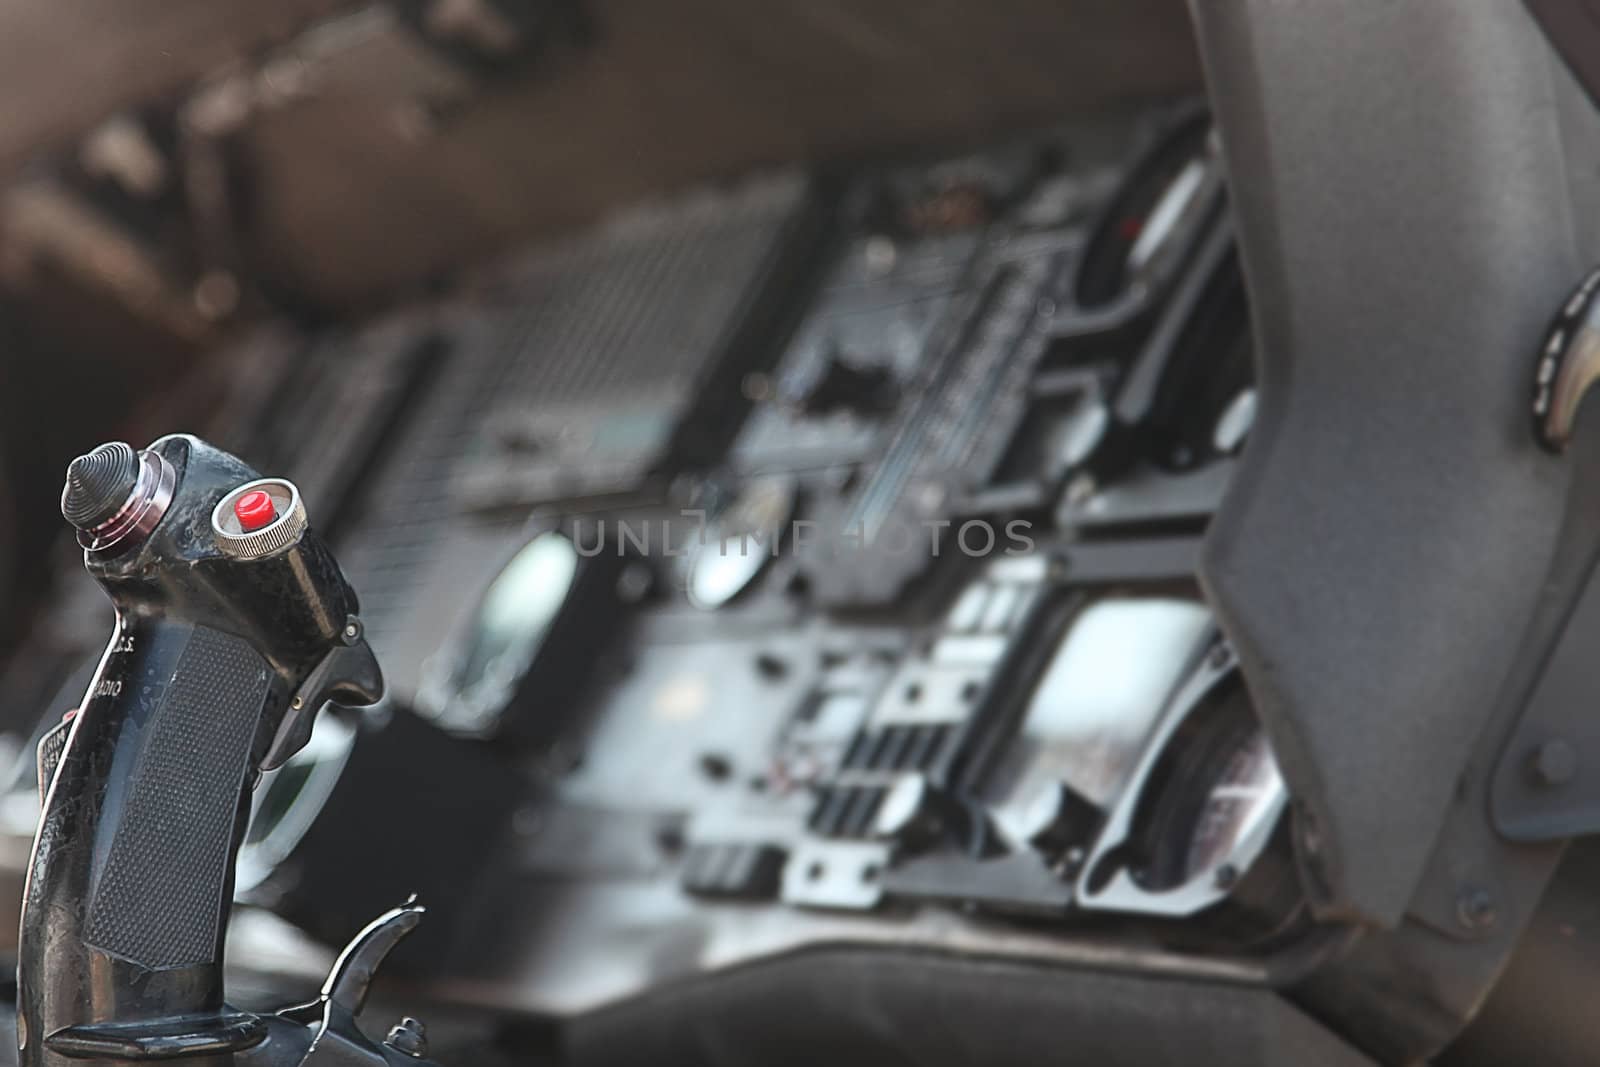 US Military Jet Cockpit Controls Close Up by duplass